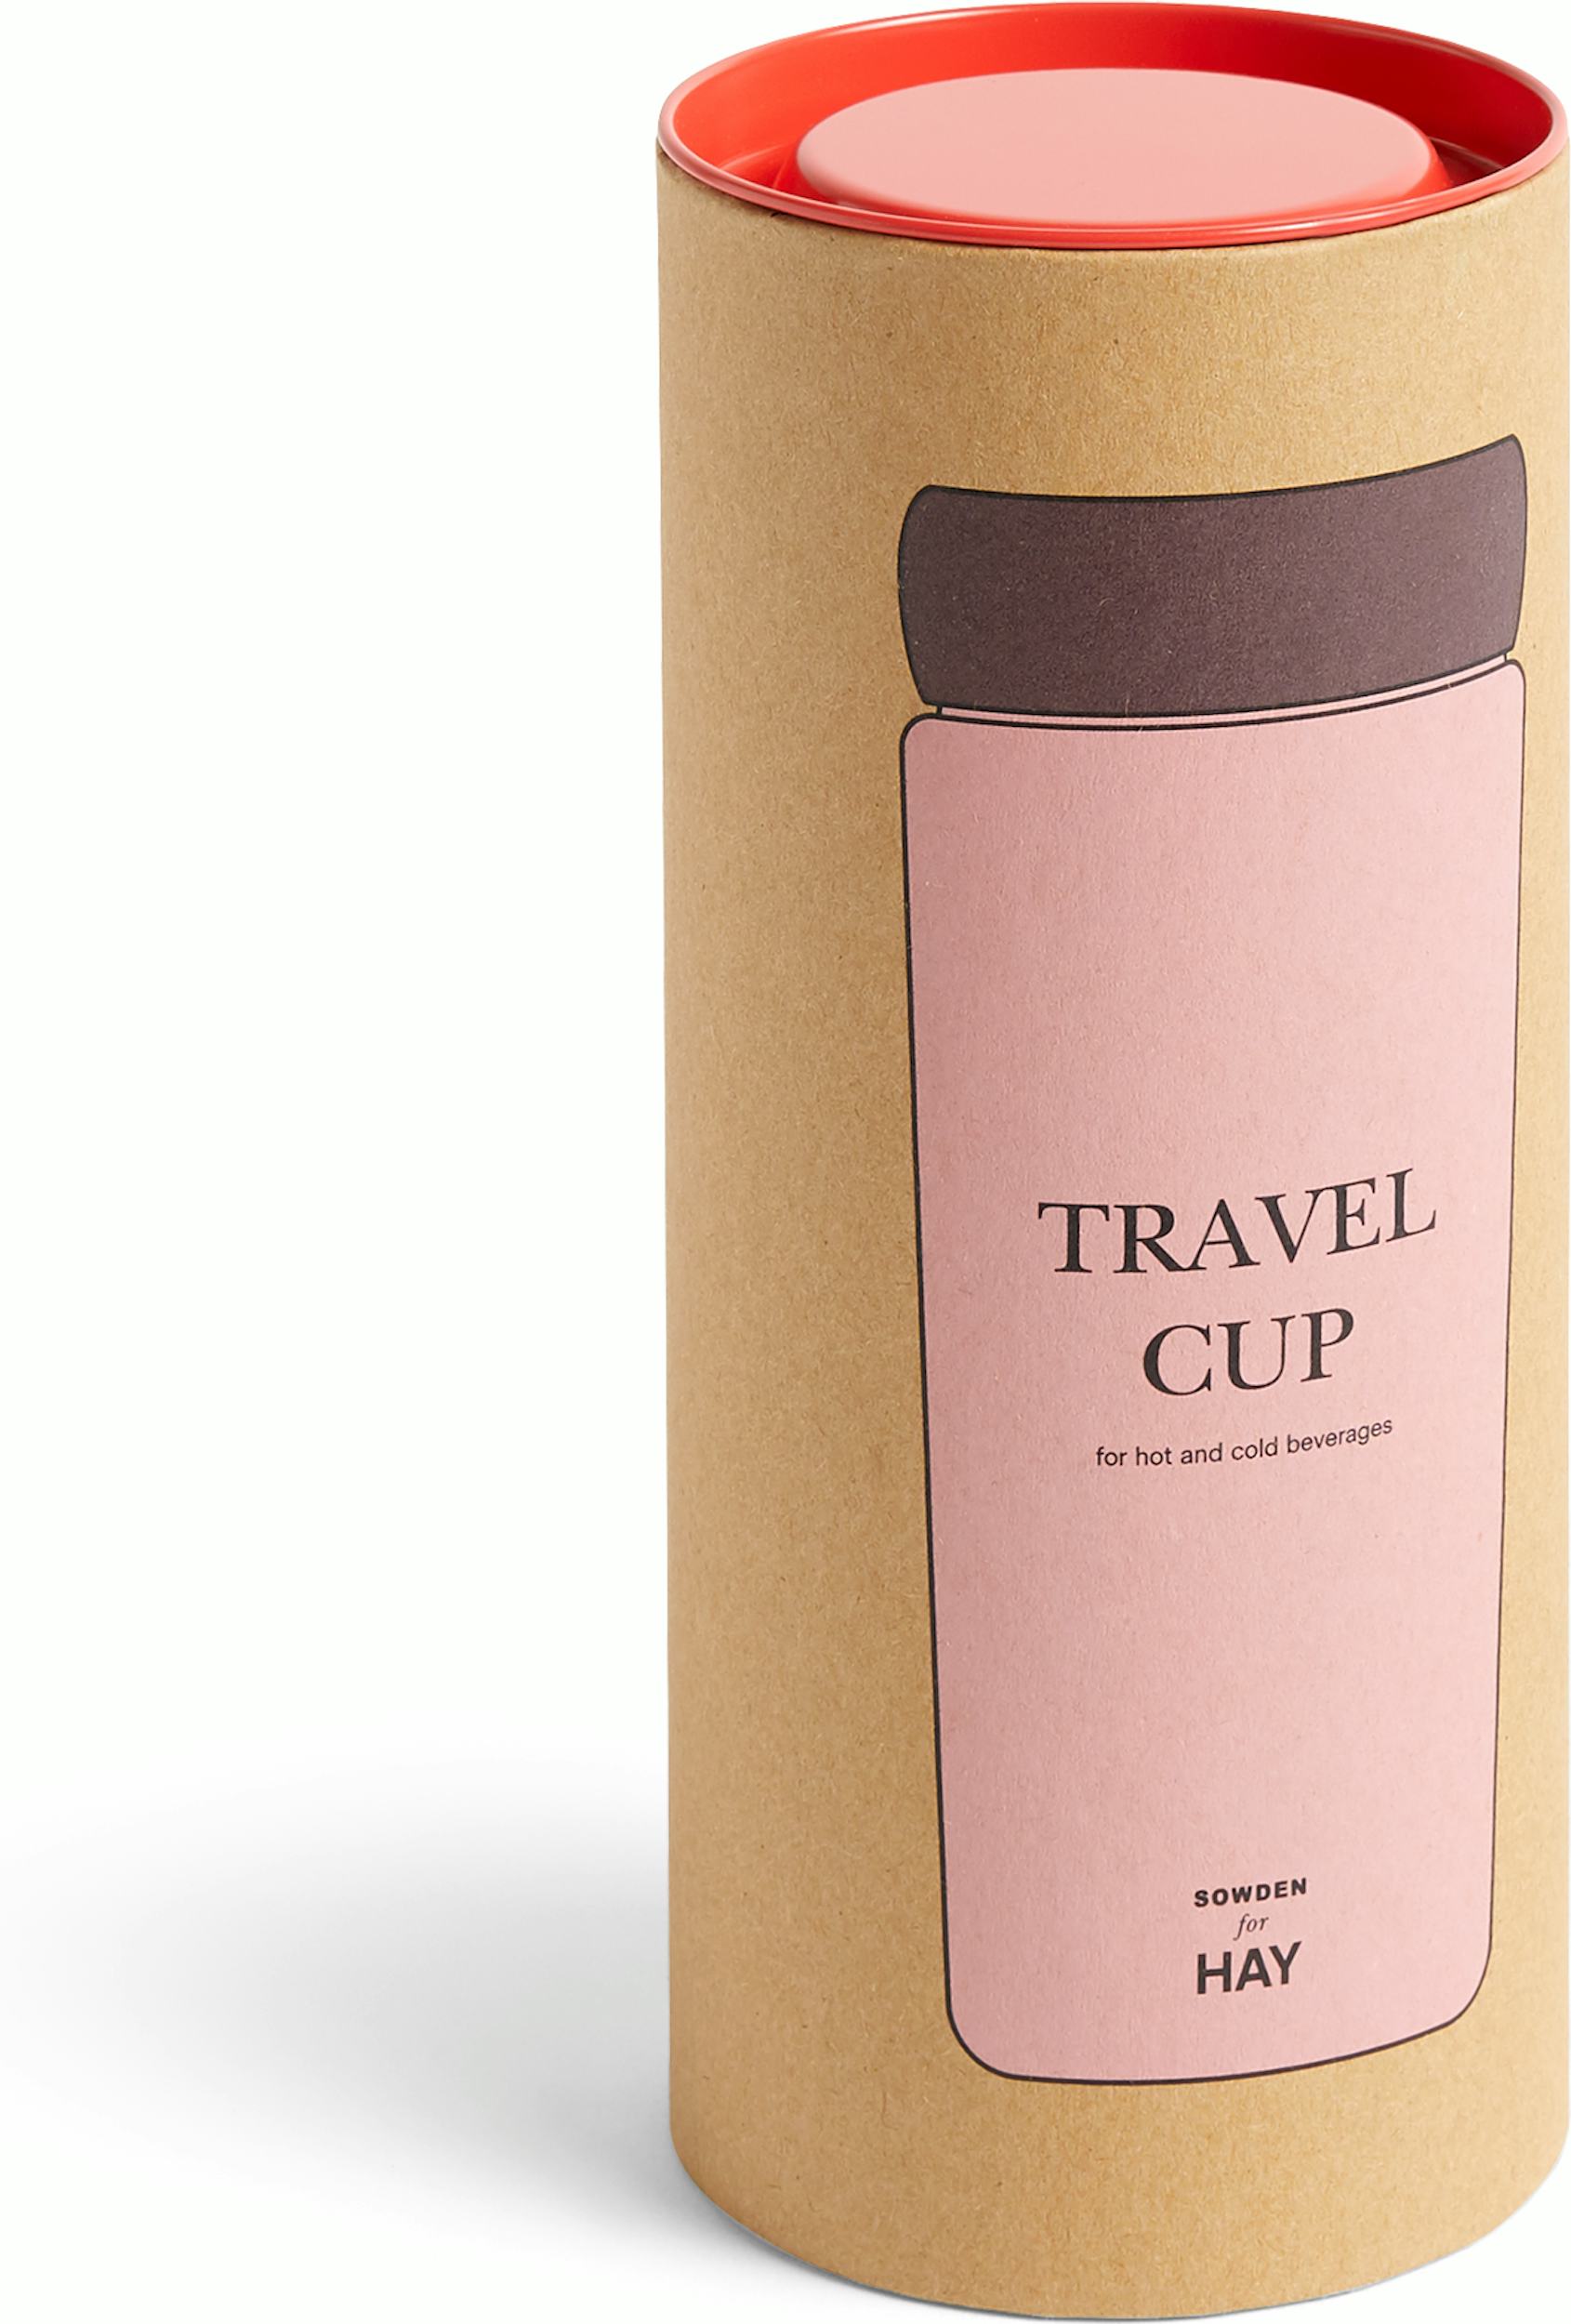 Sowden Travel Cup – HAY